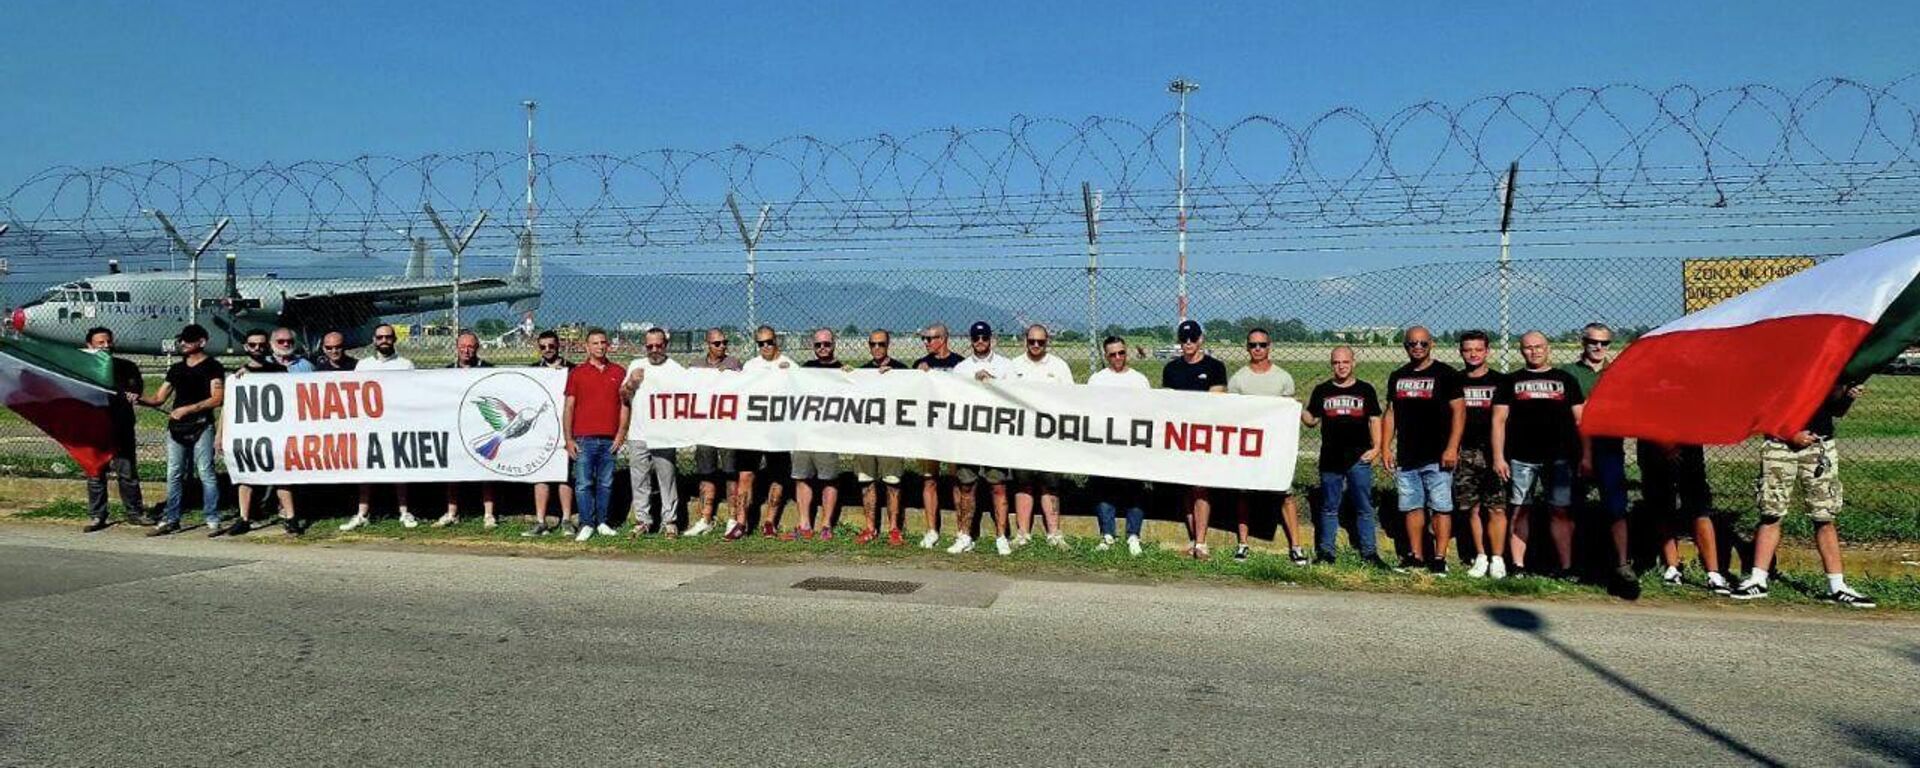 Rally at Pisa military airport against NATO participation in the conflict in Ukraine. - Sputnik Africa, 1920, 20.07.2023